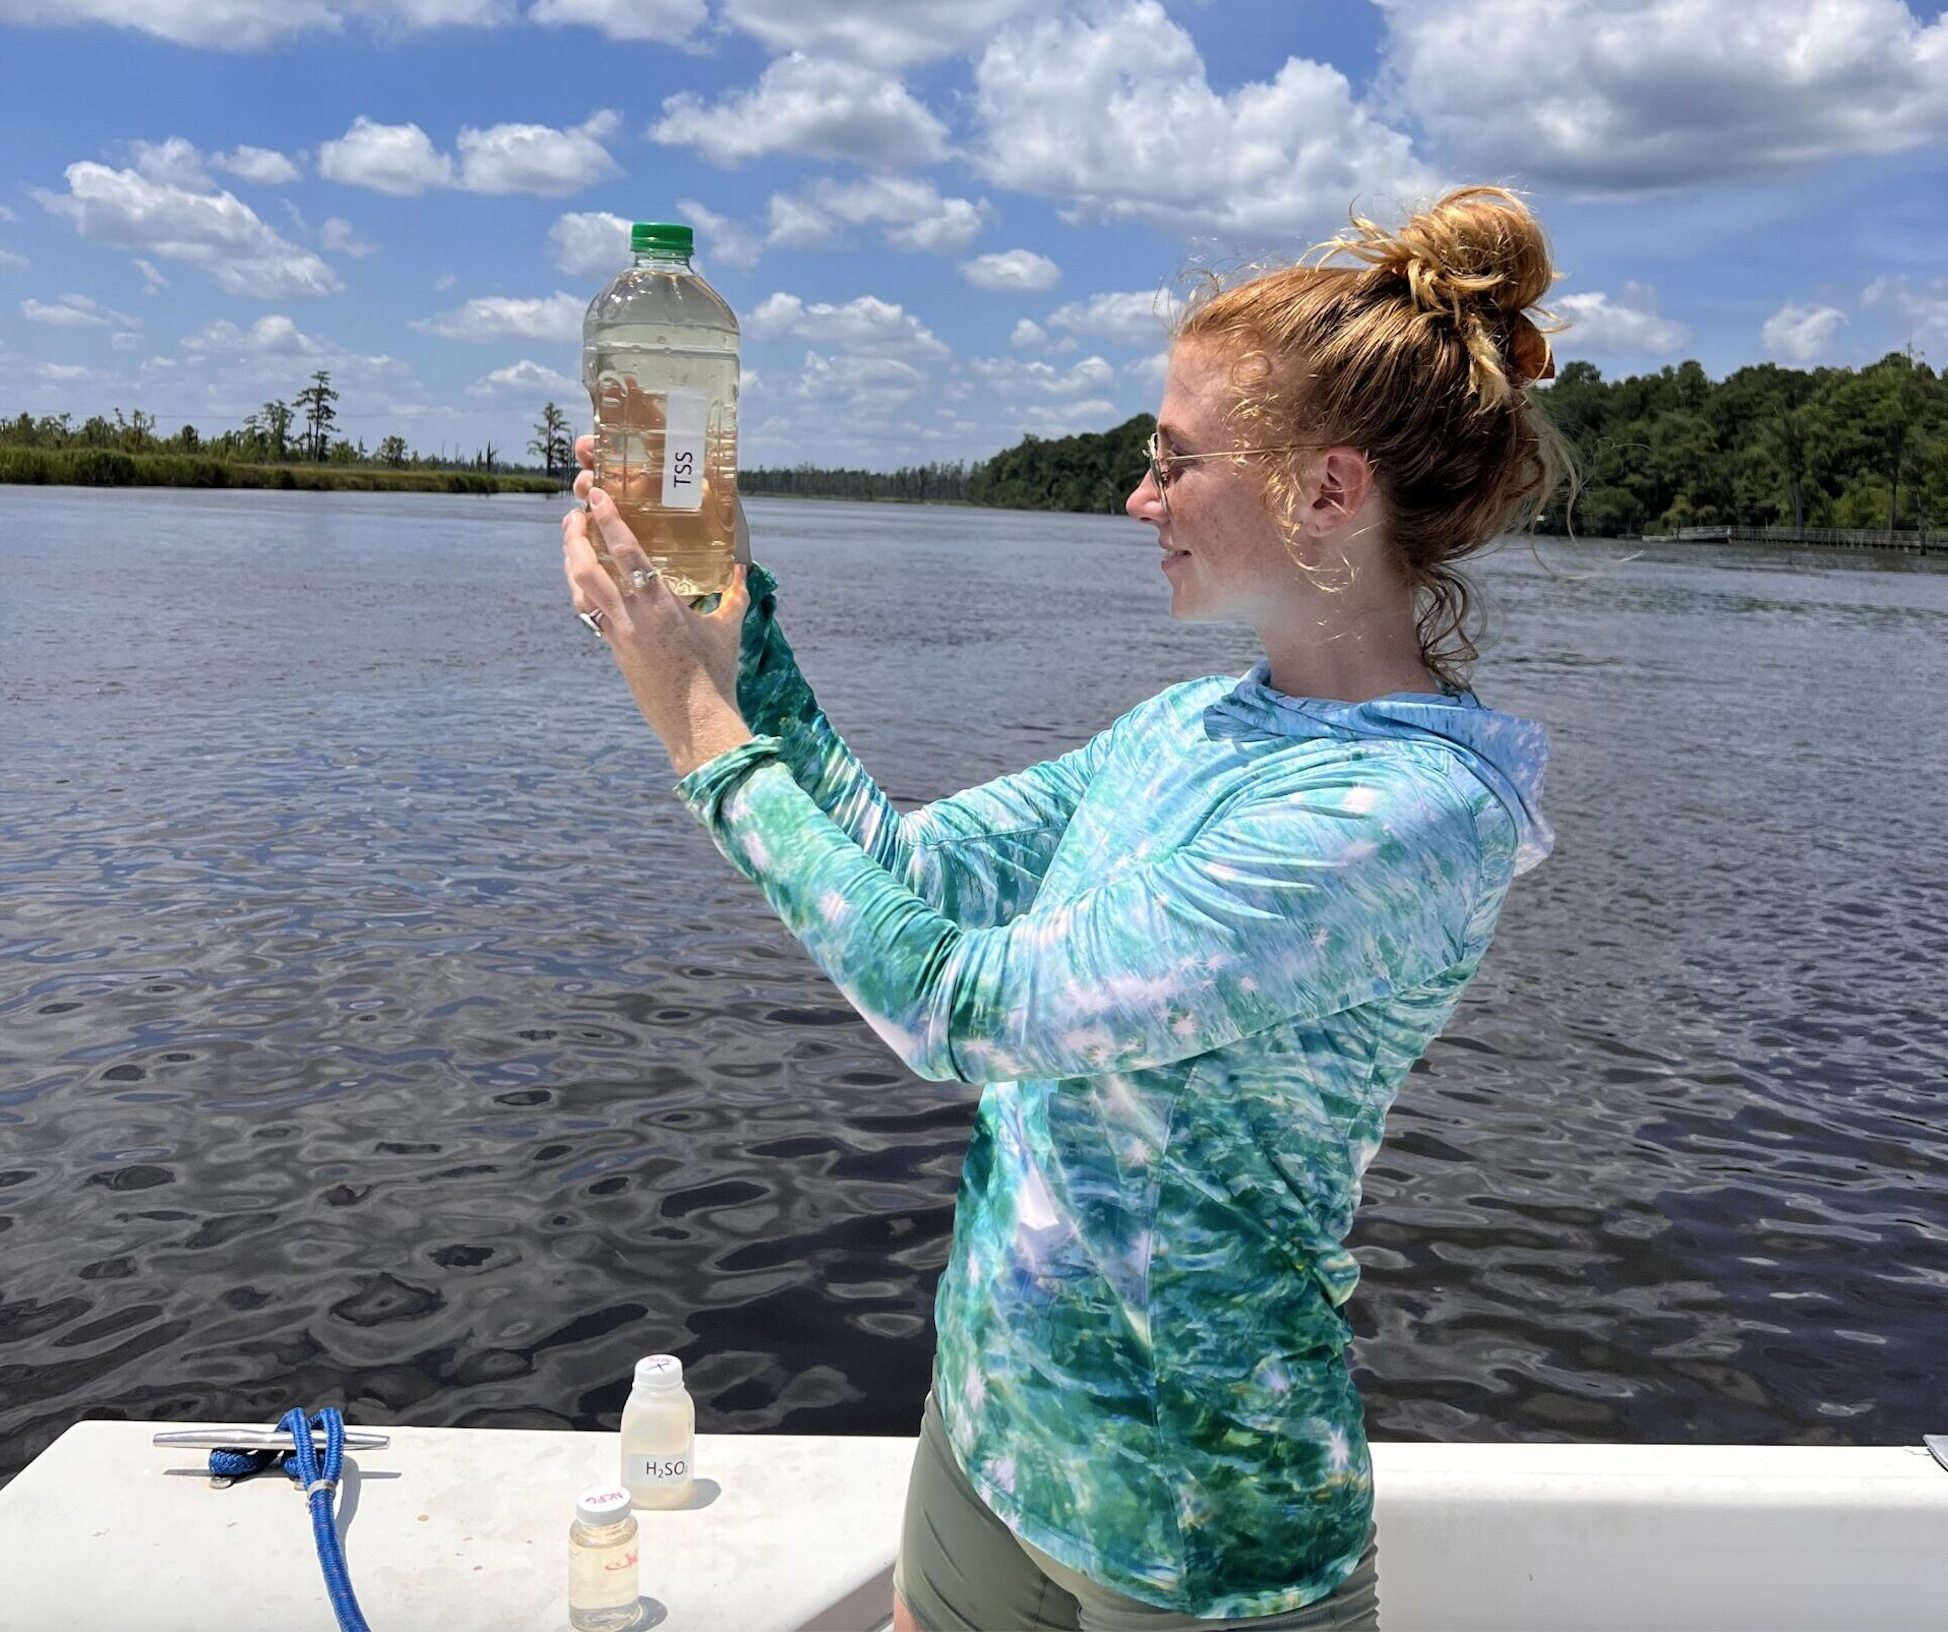 Colleen holds a bottle filled with sampled water while on a boat.